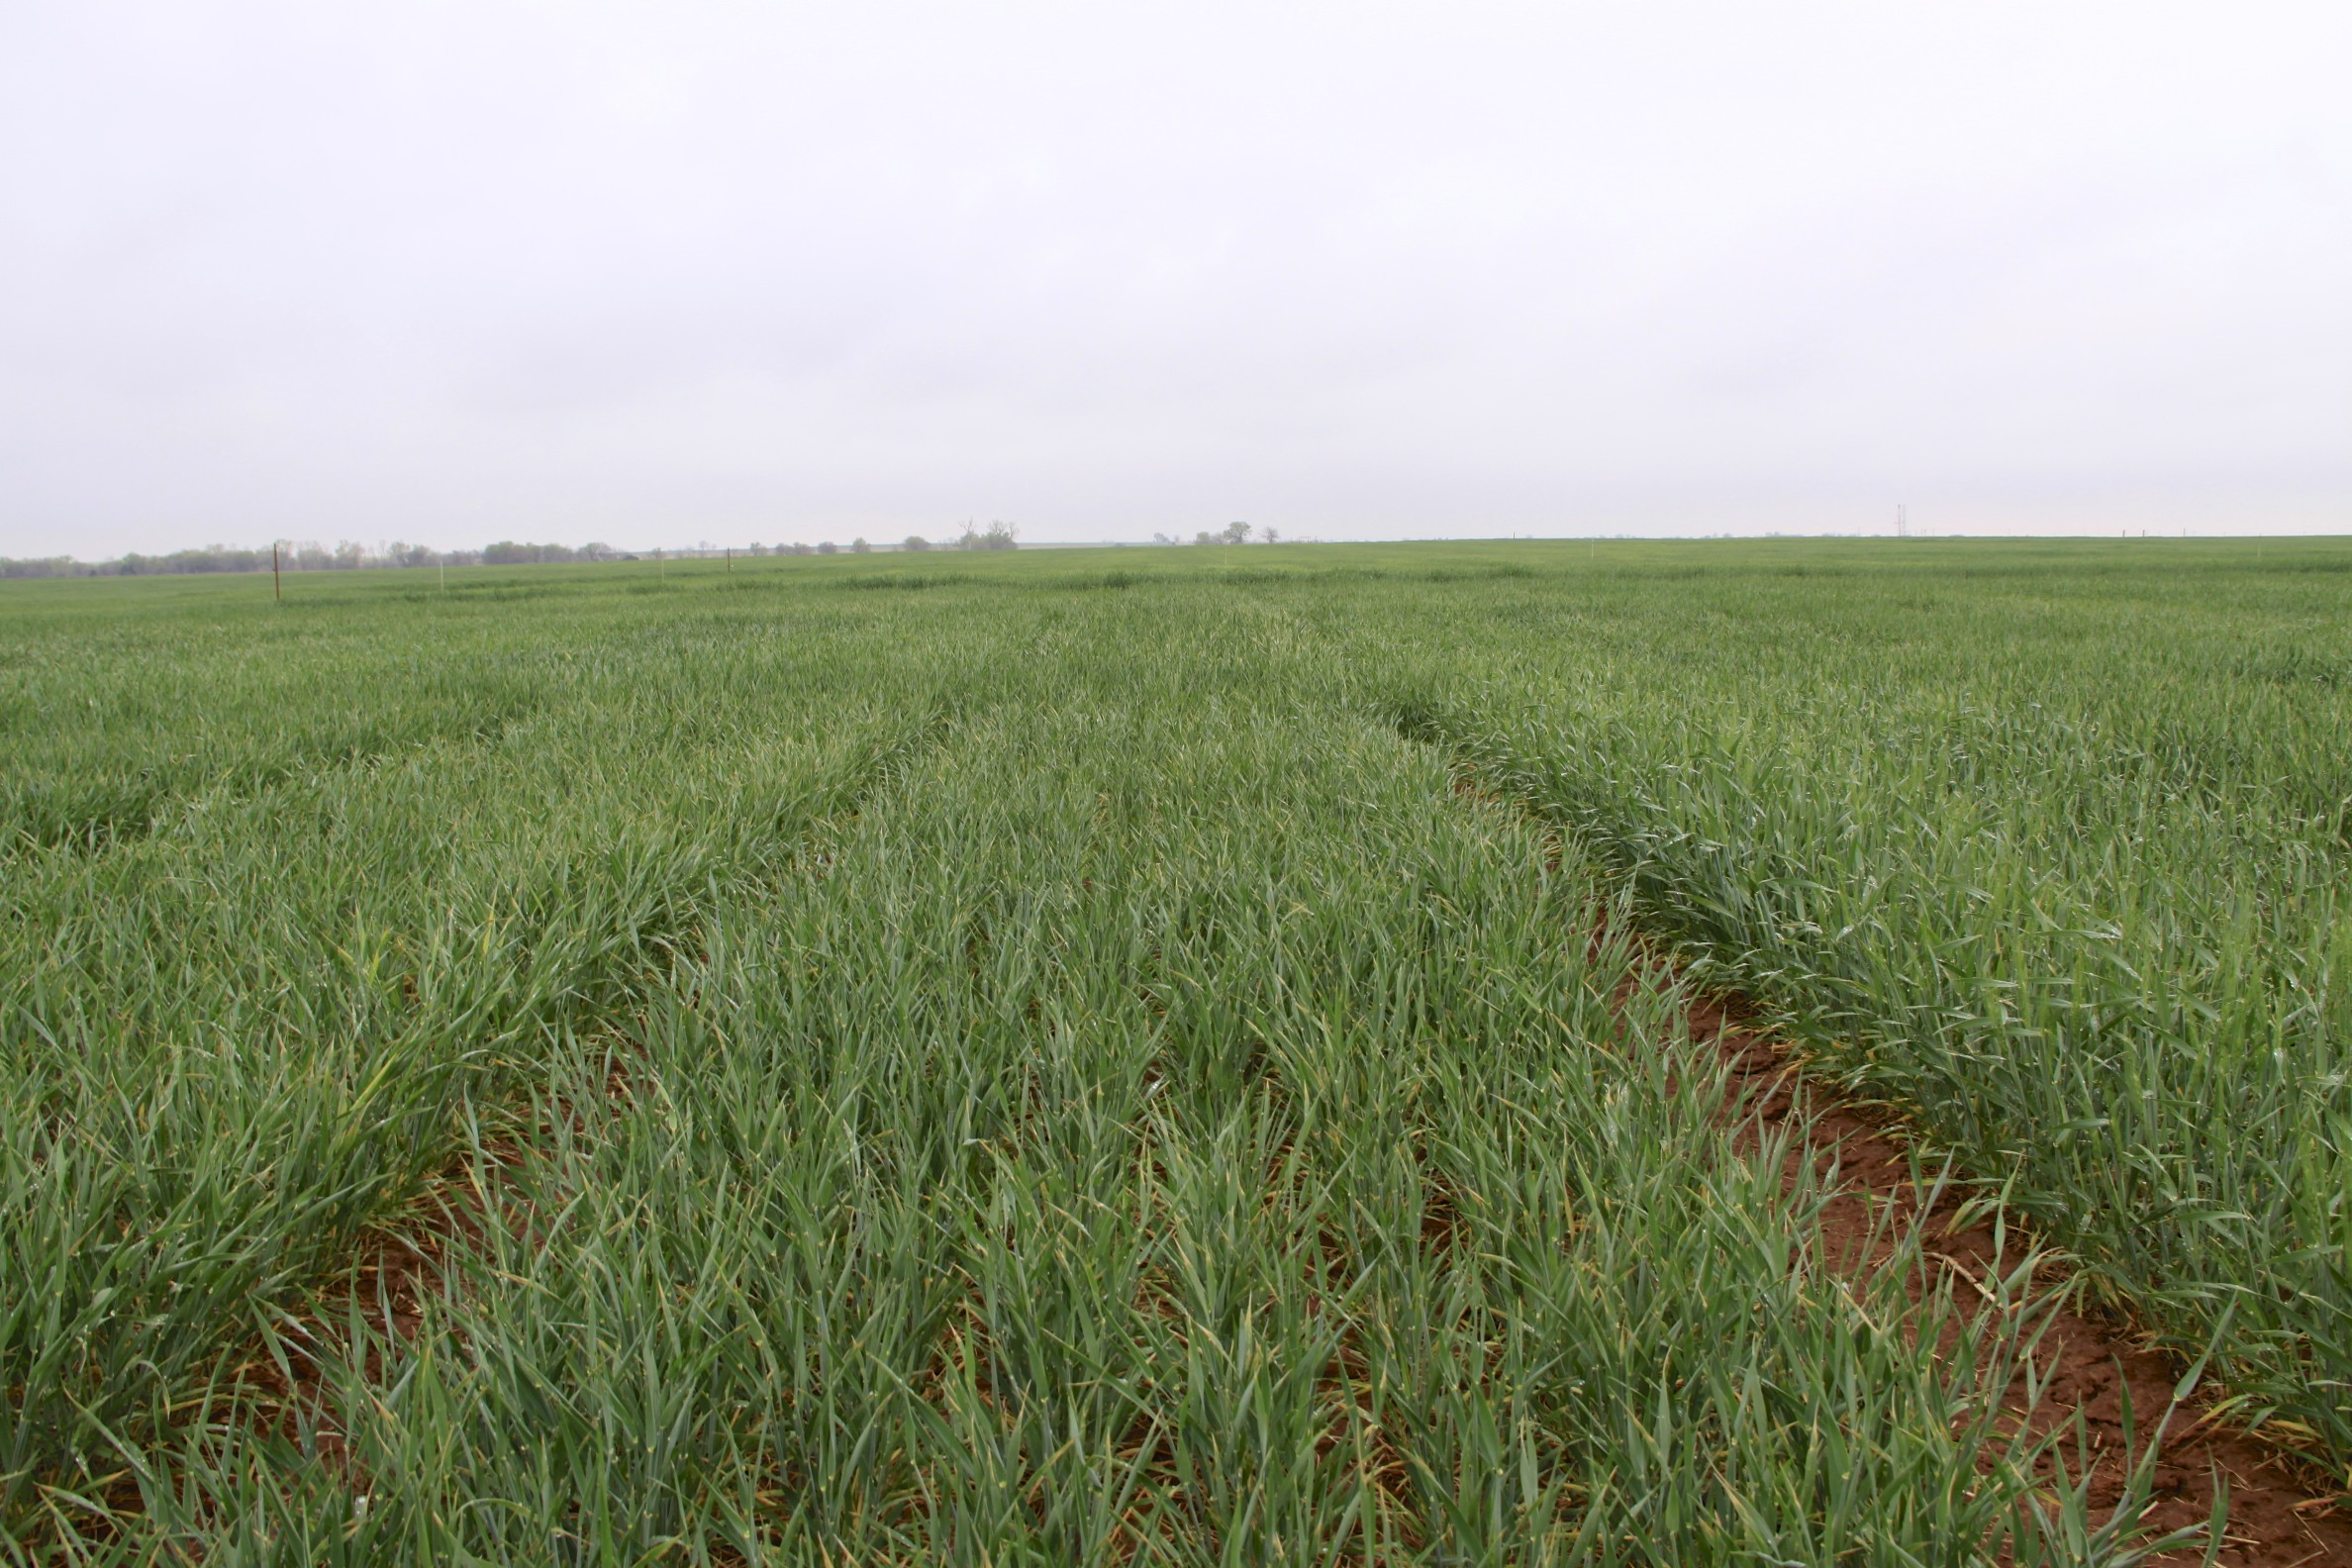 Oklahoma Wheat Crop Condition Leads The Region in The First Major USDA Crop Progress Report of The Spring